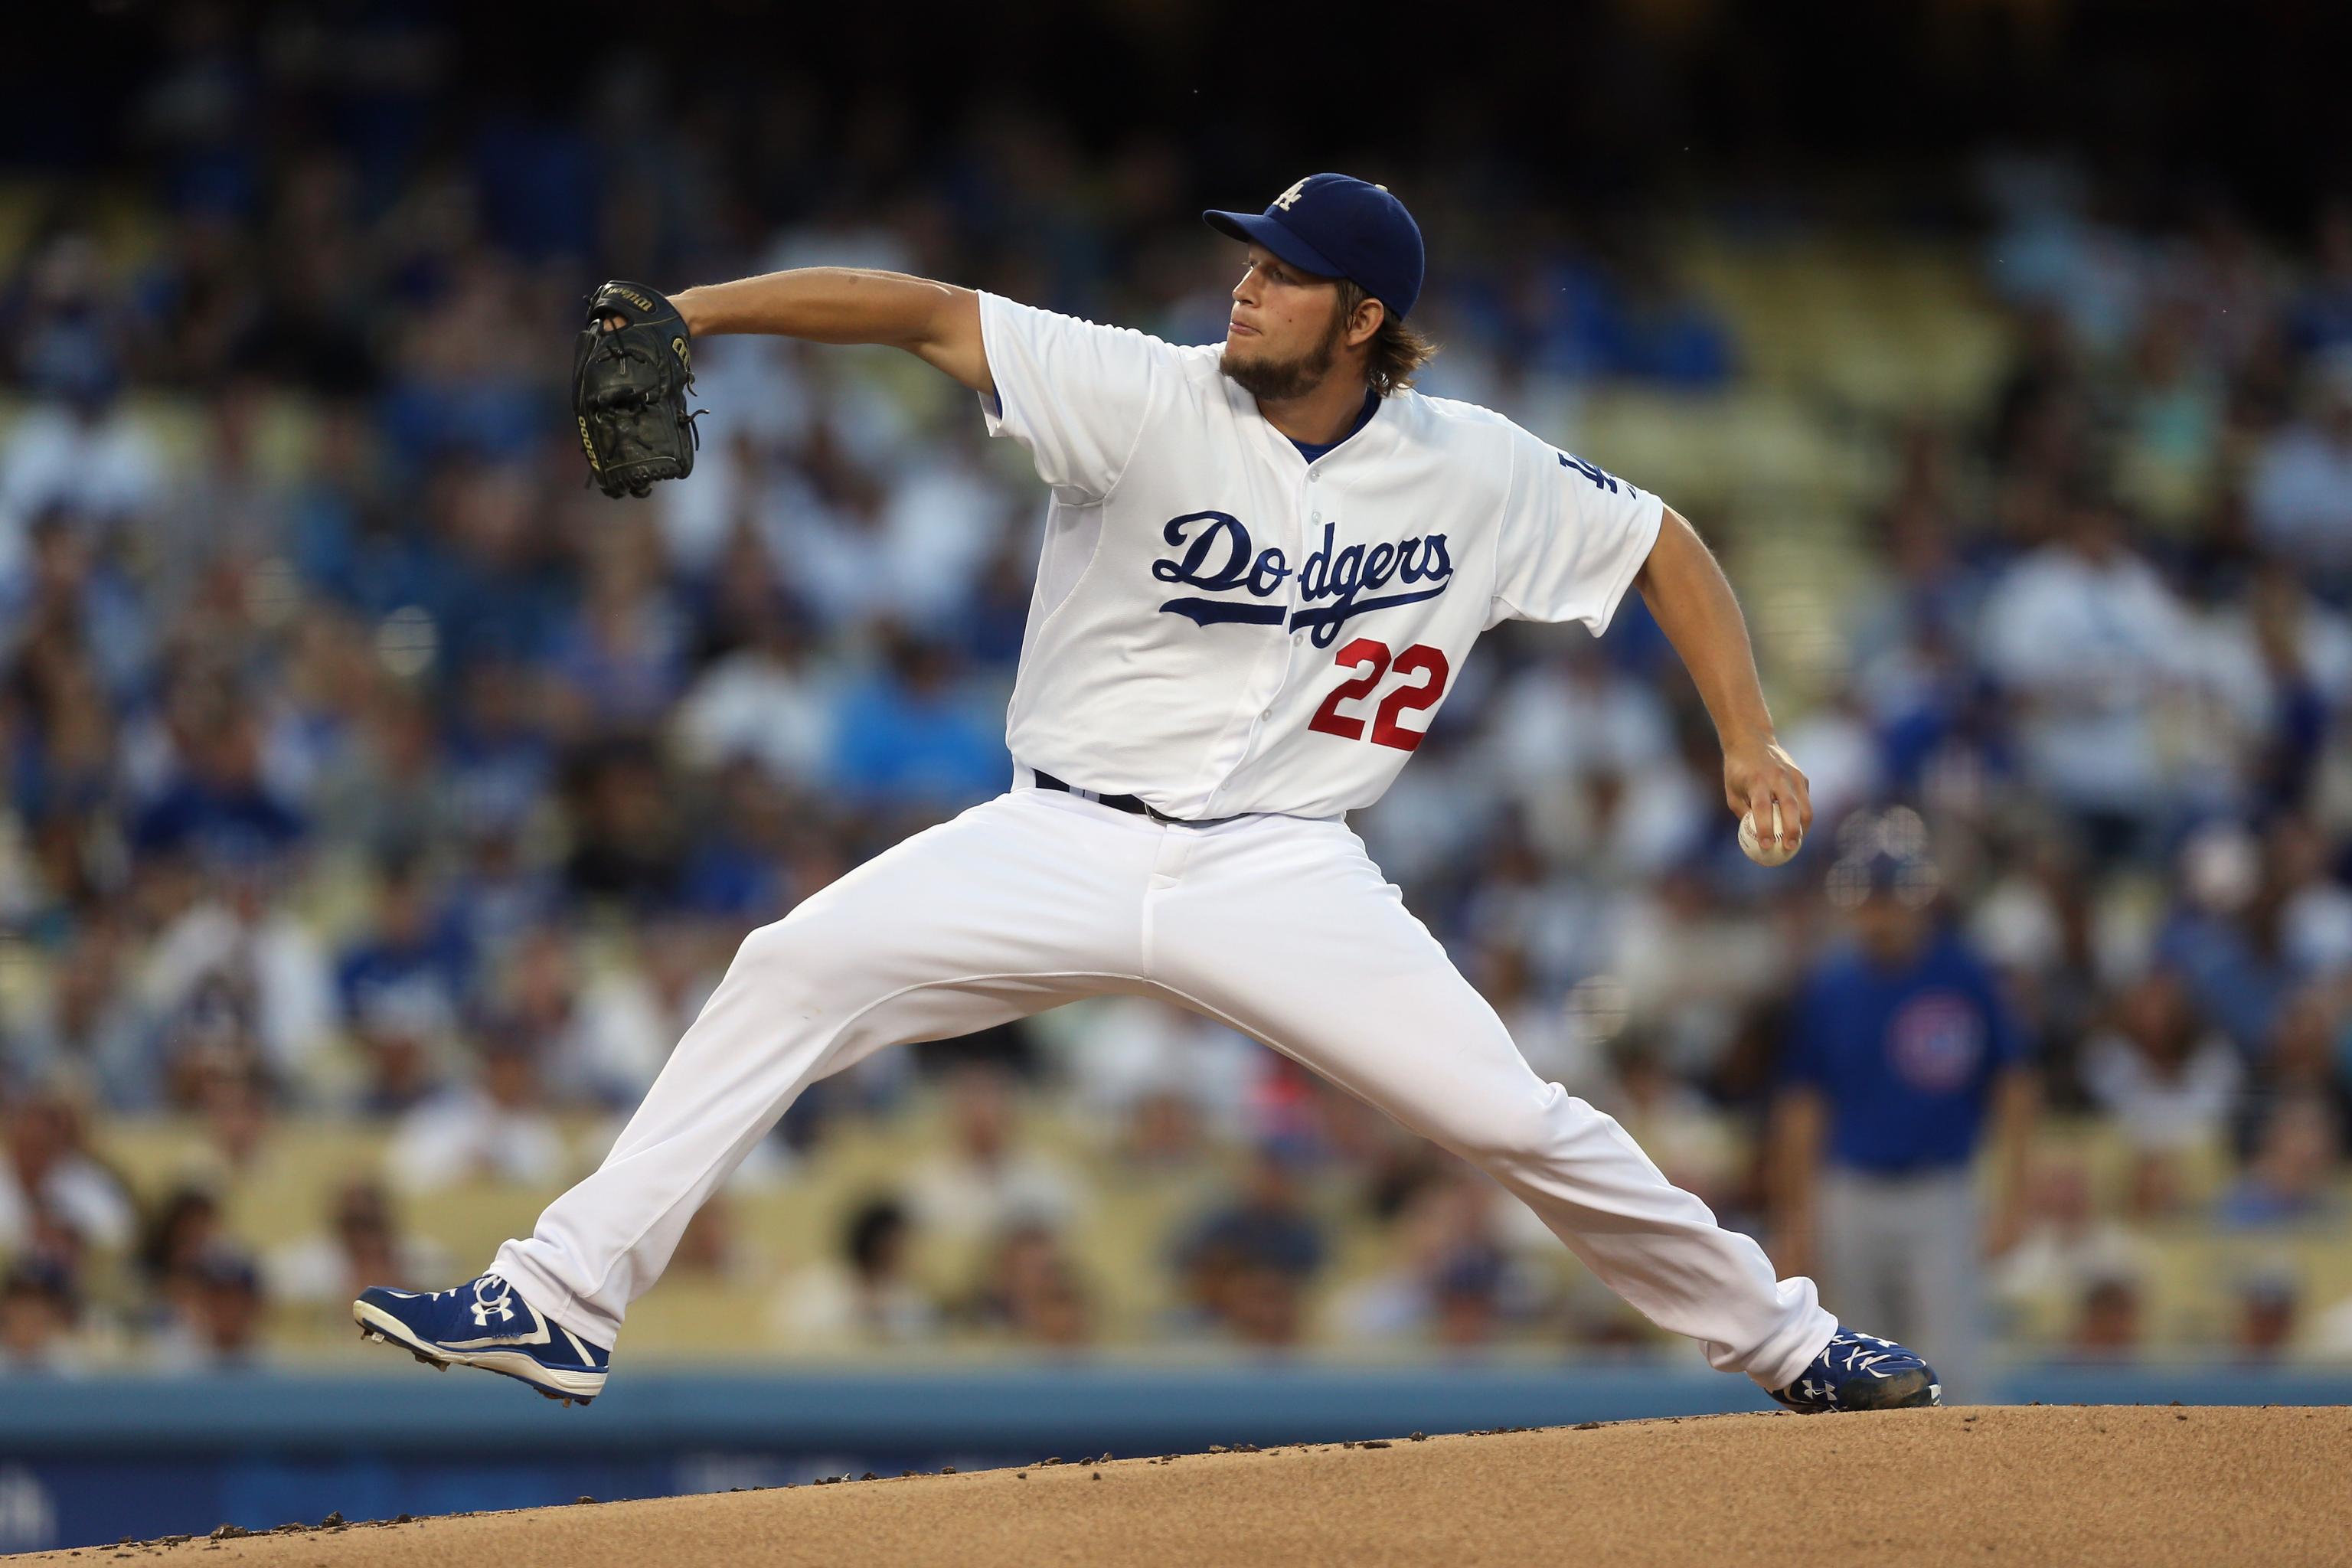 Why Record Clayton Kershaw Deal Is Still Big Dodgers Risk, Not No